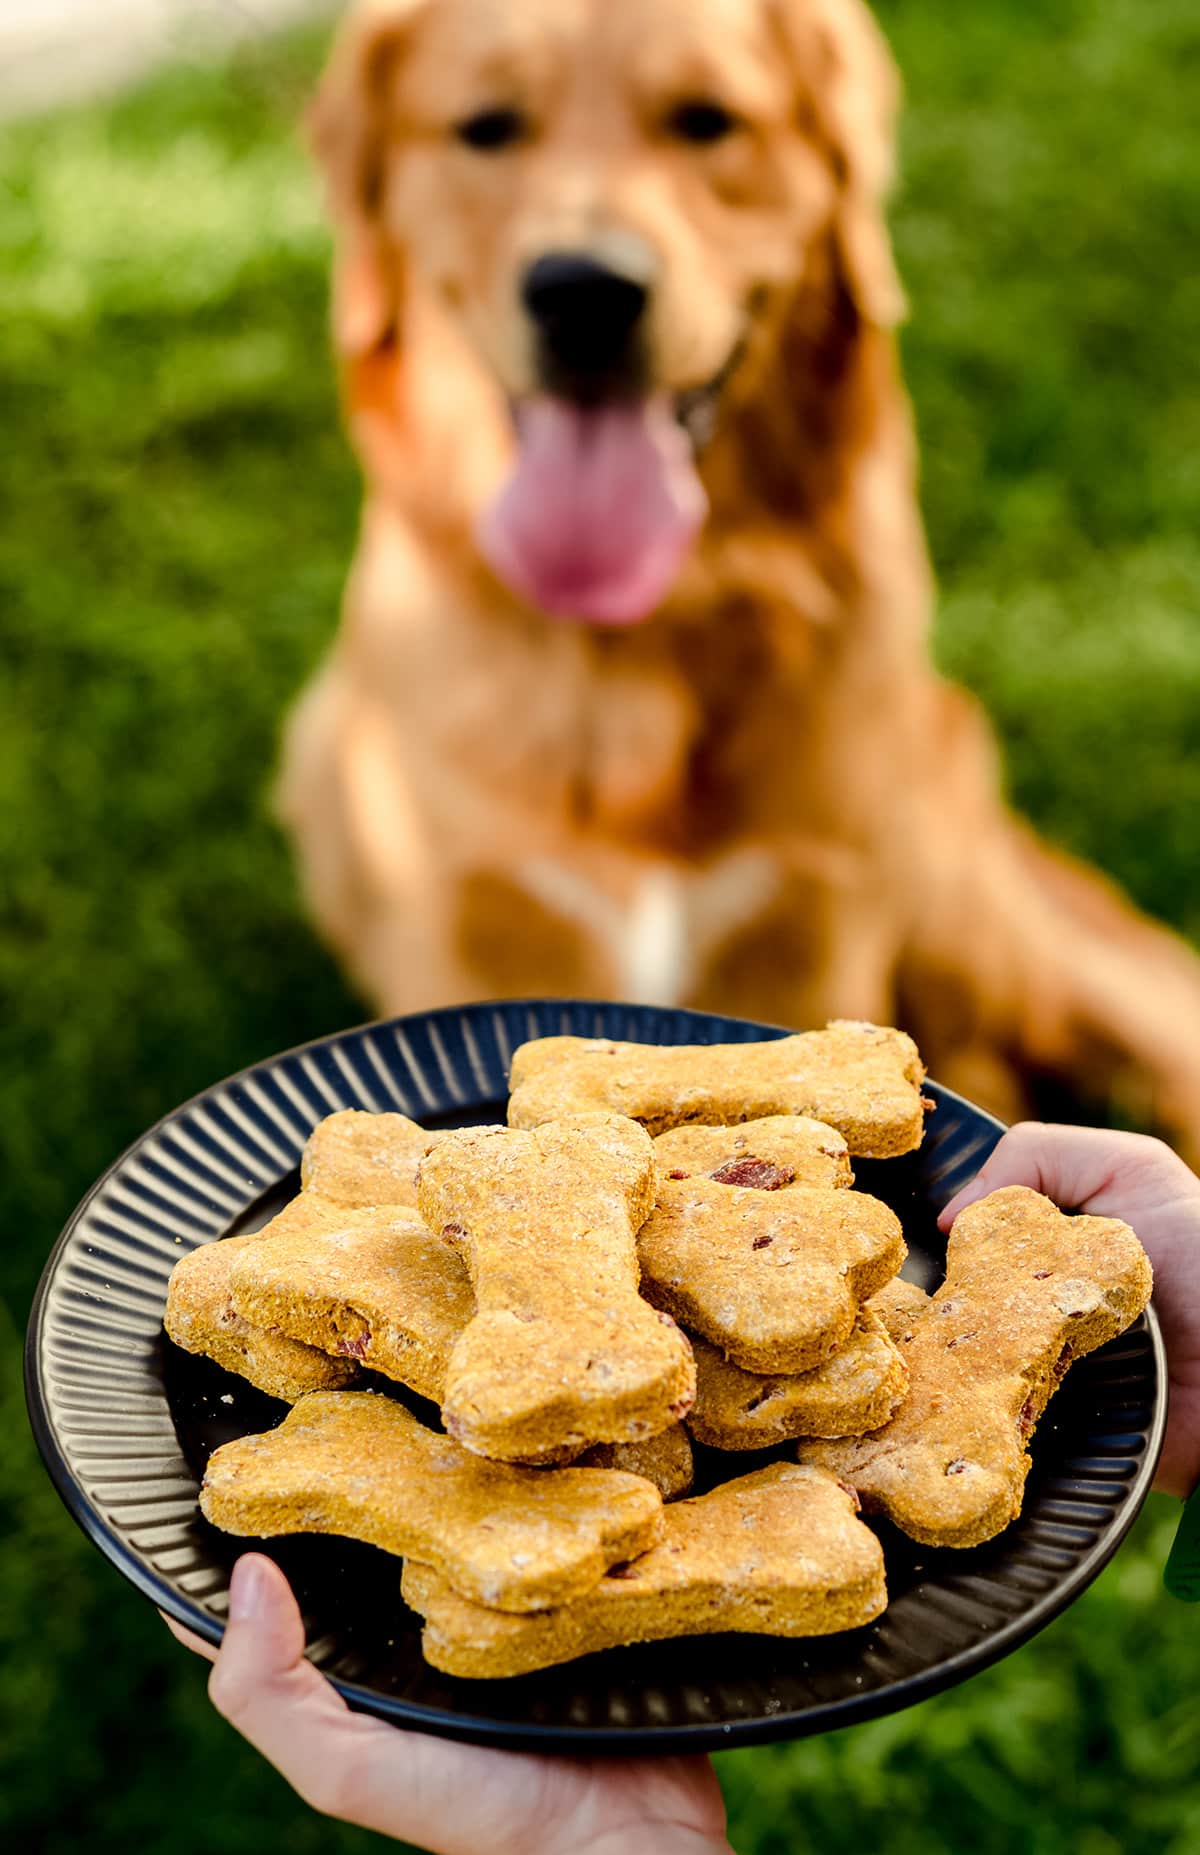 golden retriever in the background of a photo of a plate of homemade dog treats